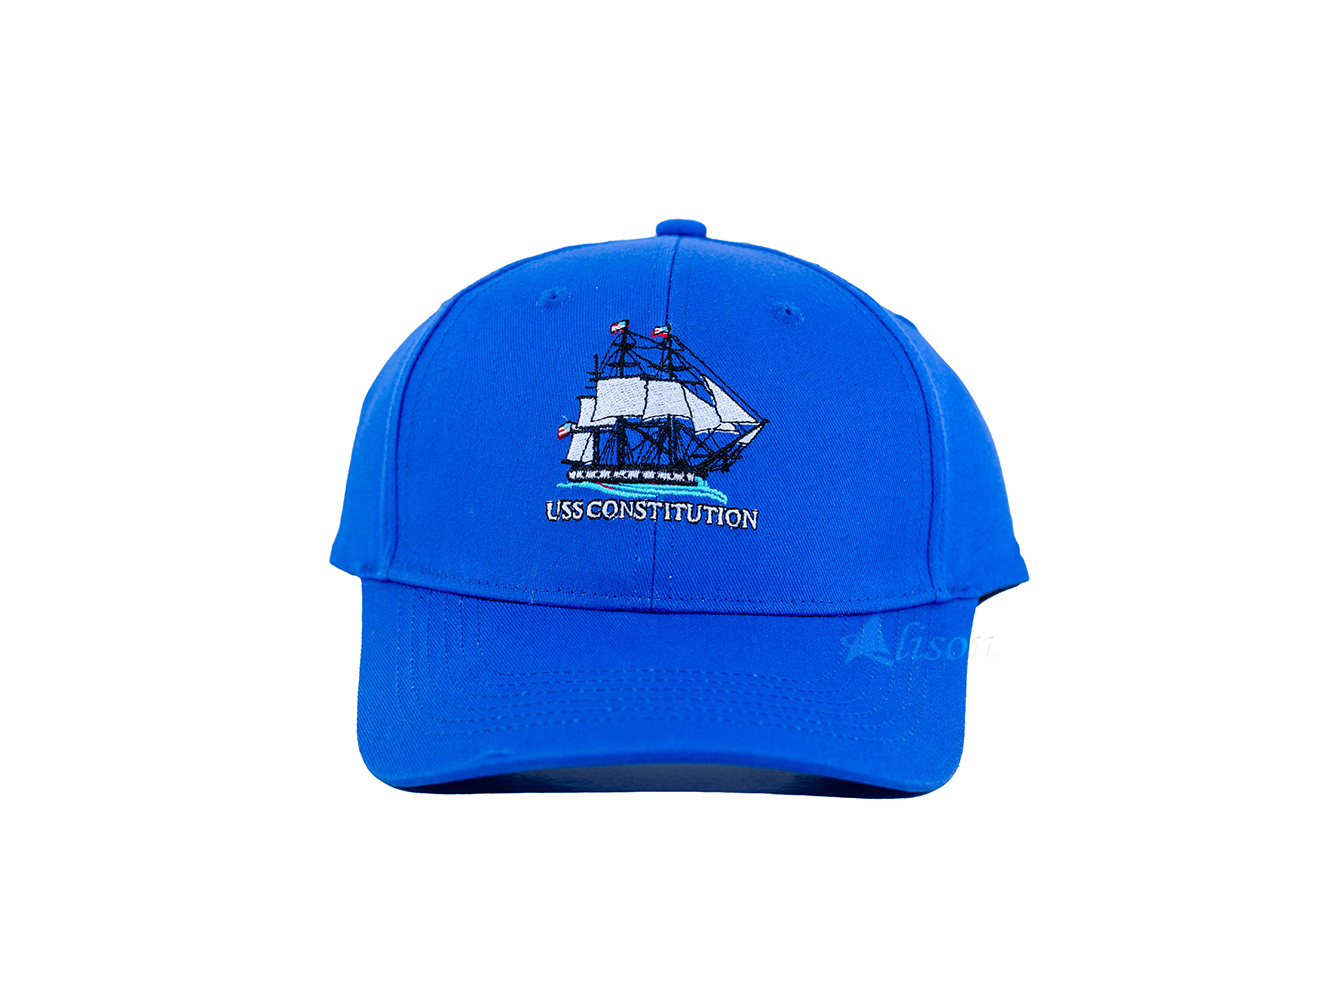 FA002 USS Constitution Embroidered Cap in Blue by Alison Nautical FA002L01.jpg